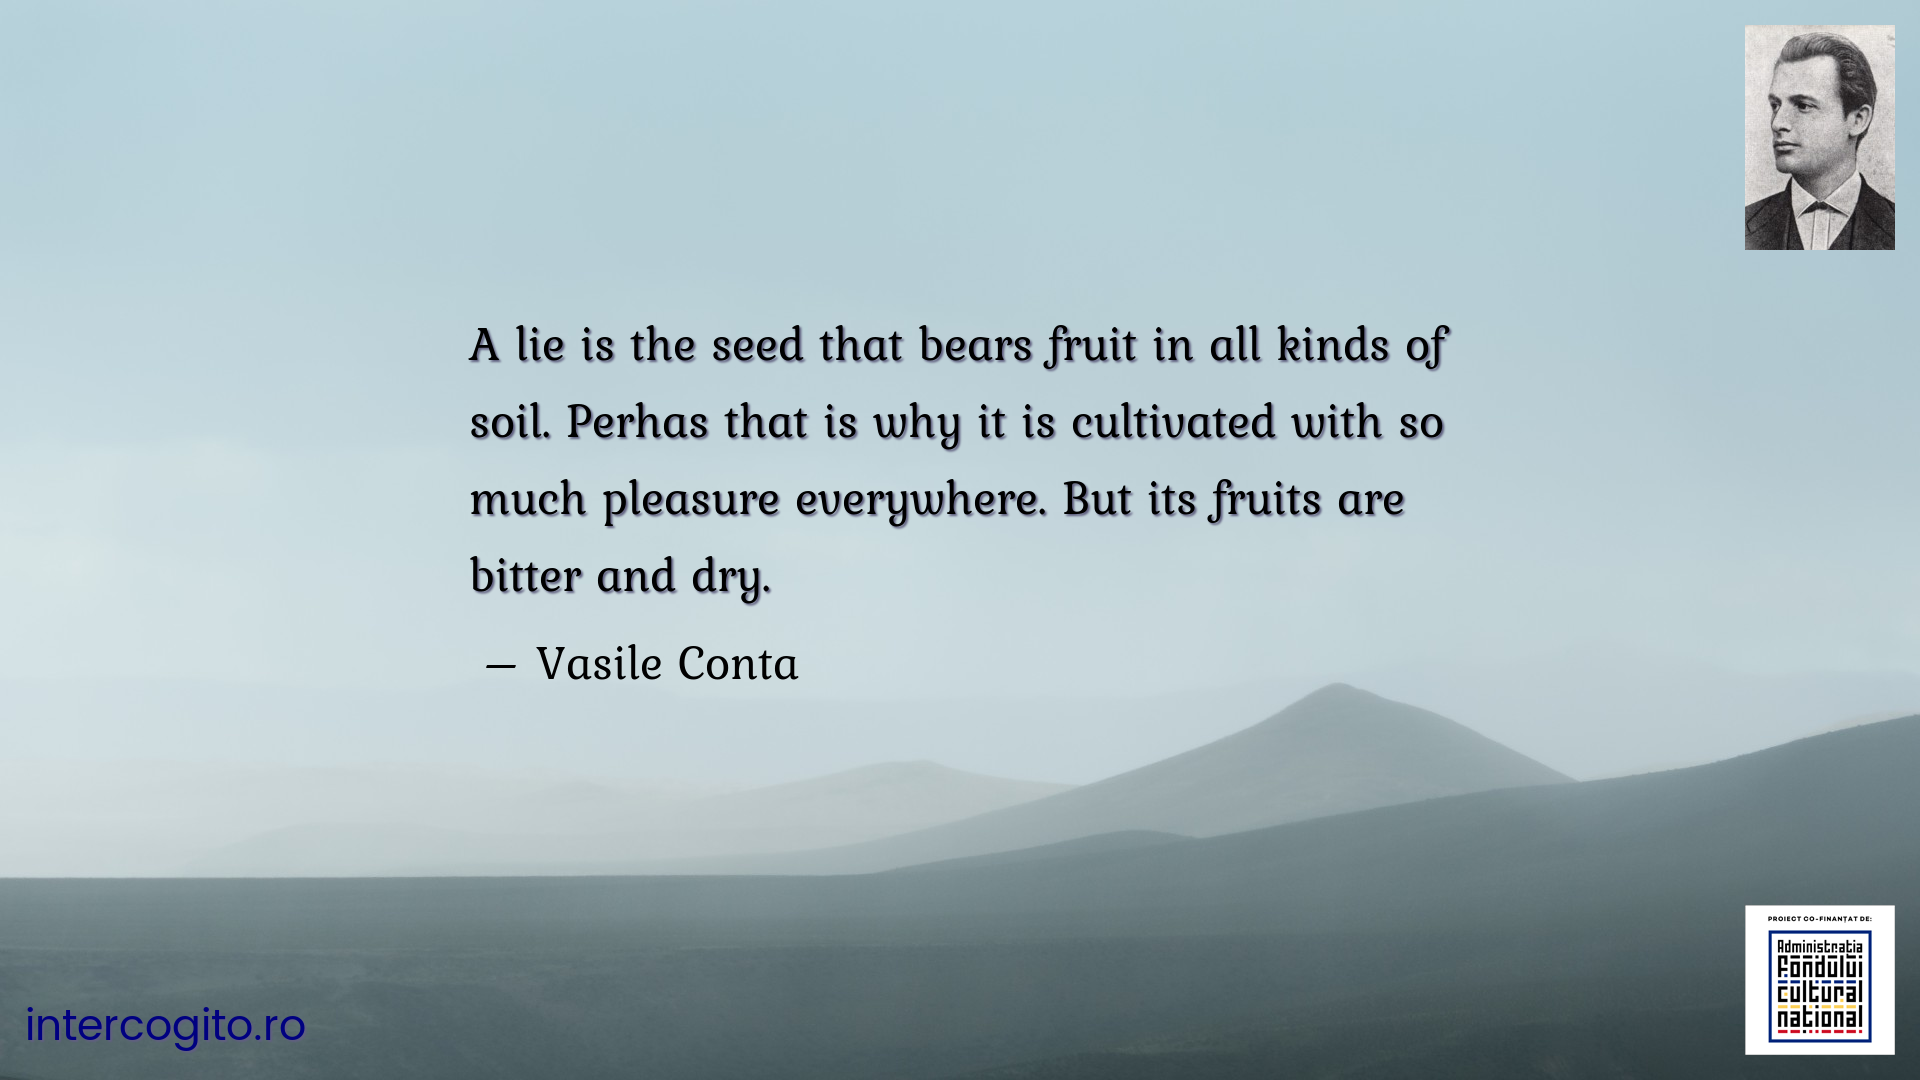 A lie is the seed that bears fruit in all kinds of soil. Perhas that is why it is cultivated with so much pleasure everywhere. But its fruits are bitter and dry.